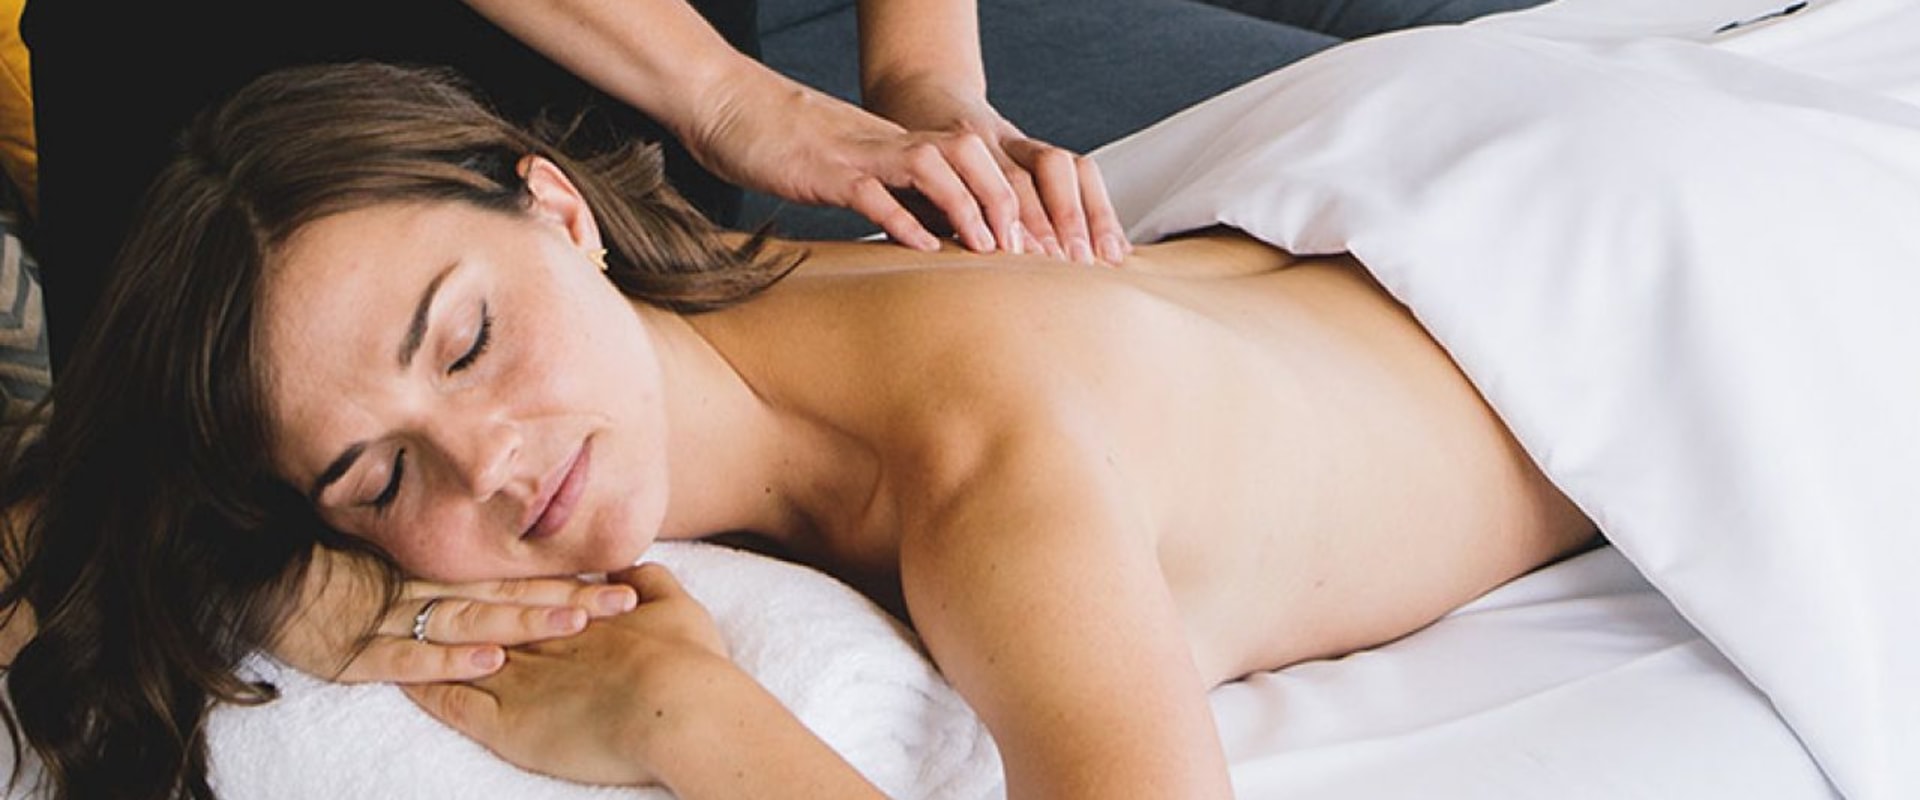 How to prepare for massage therapy?